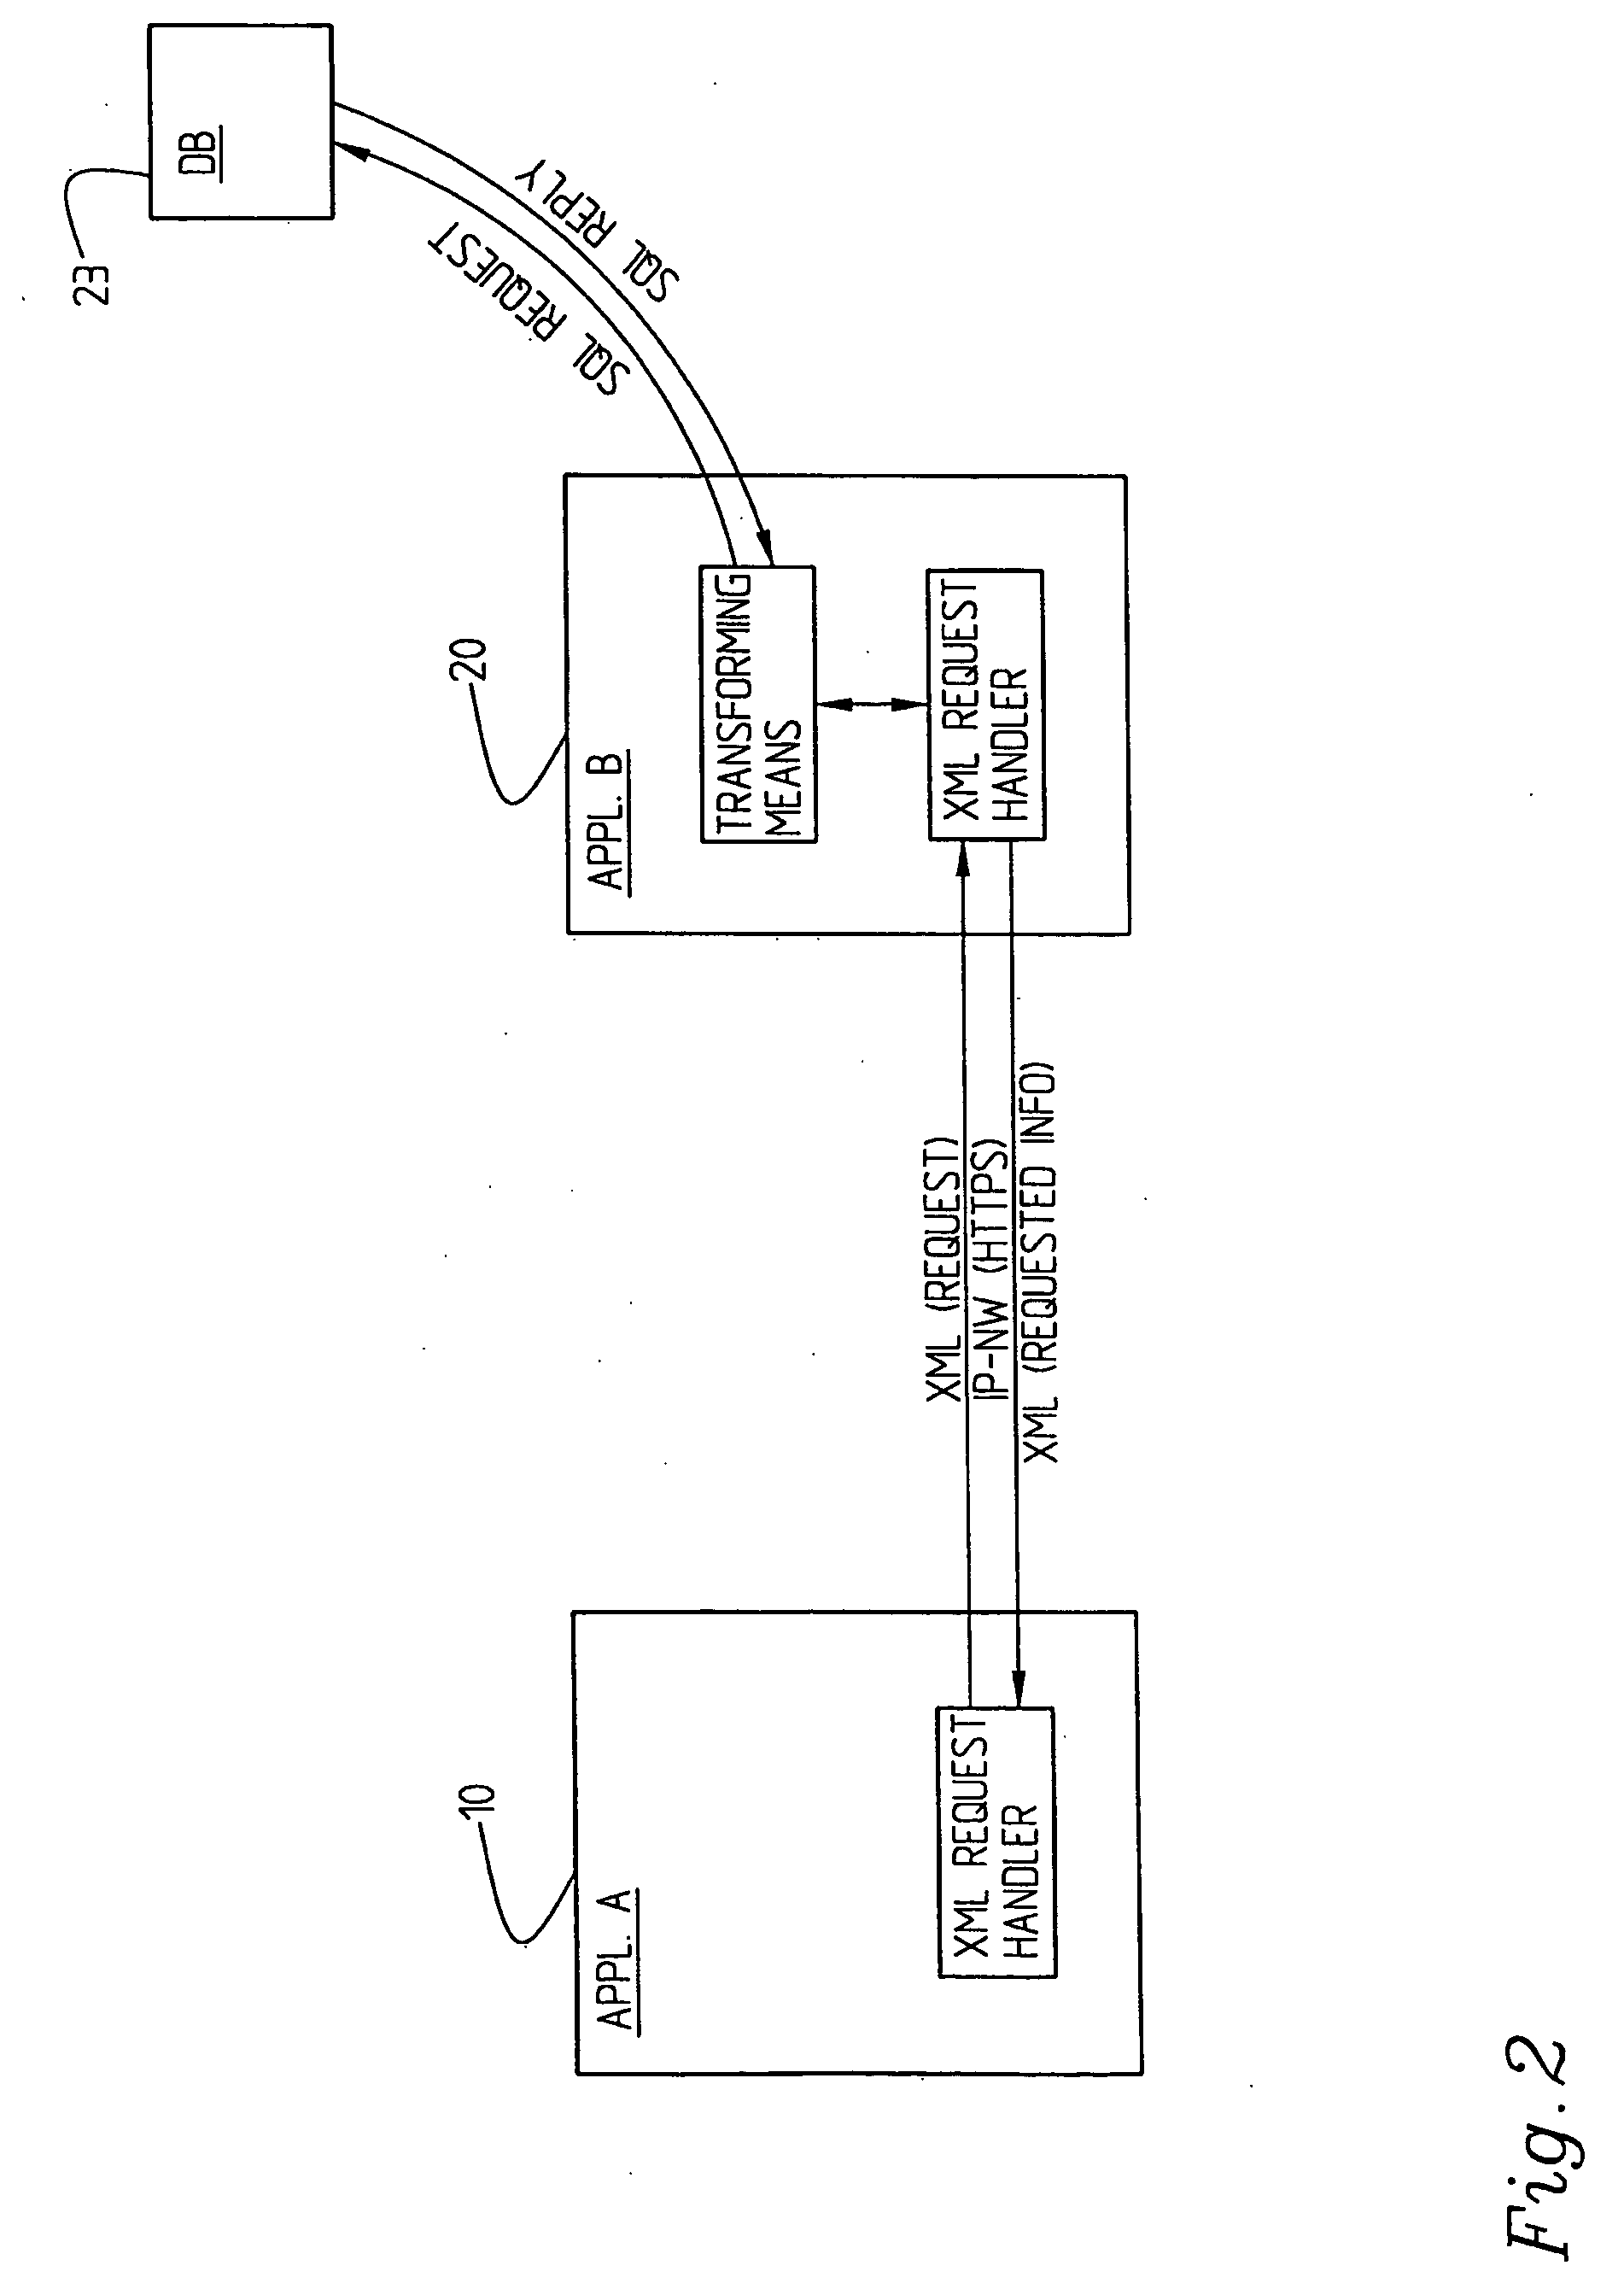 System and method relating to access of information